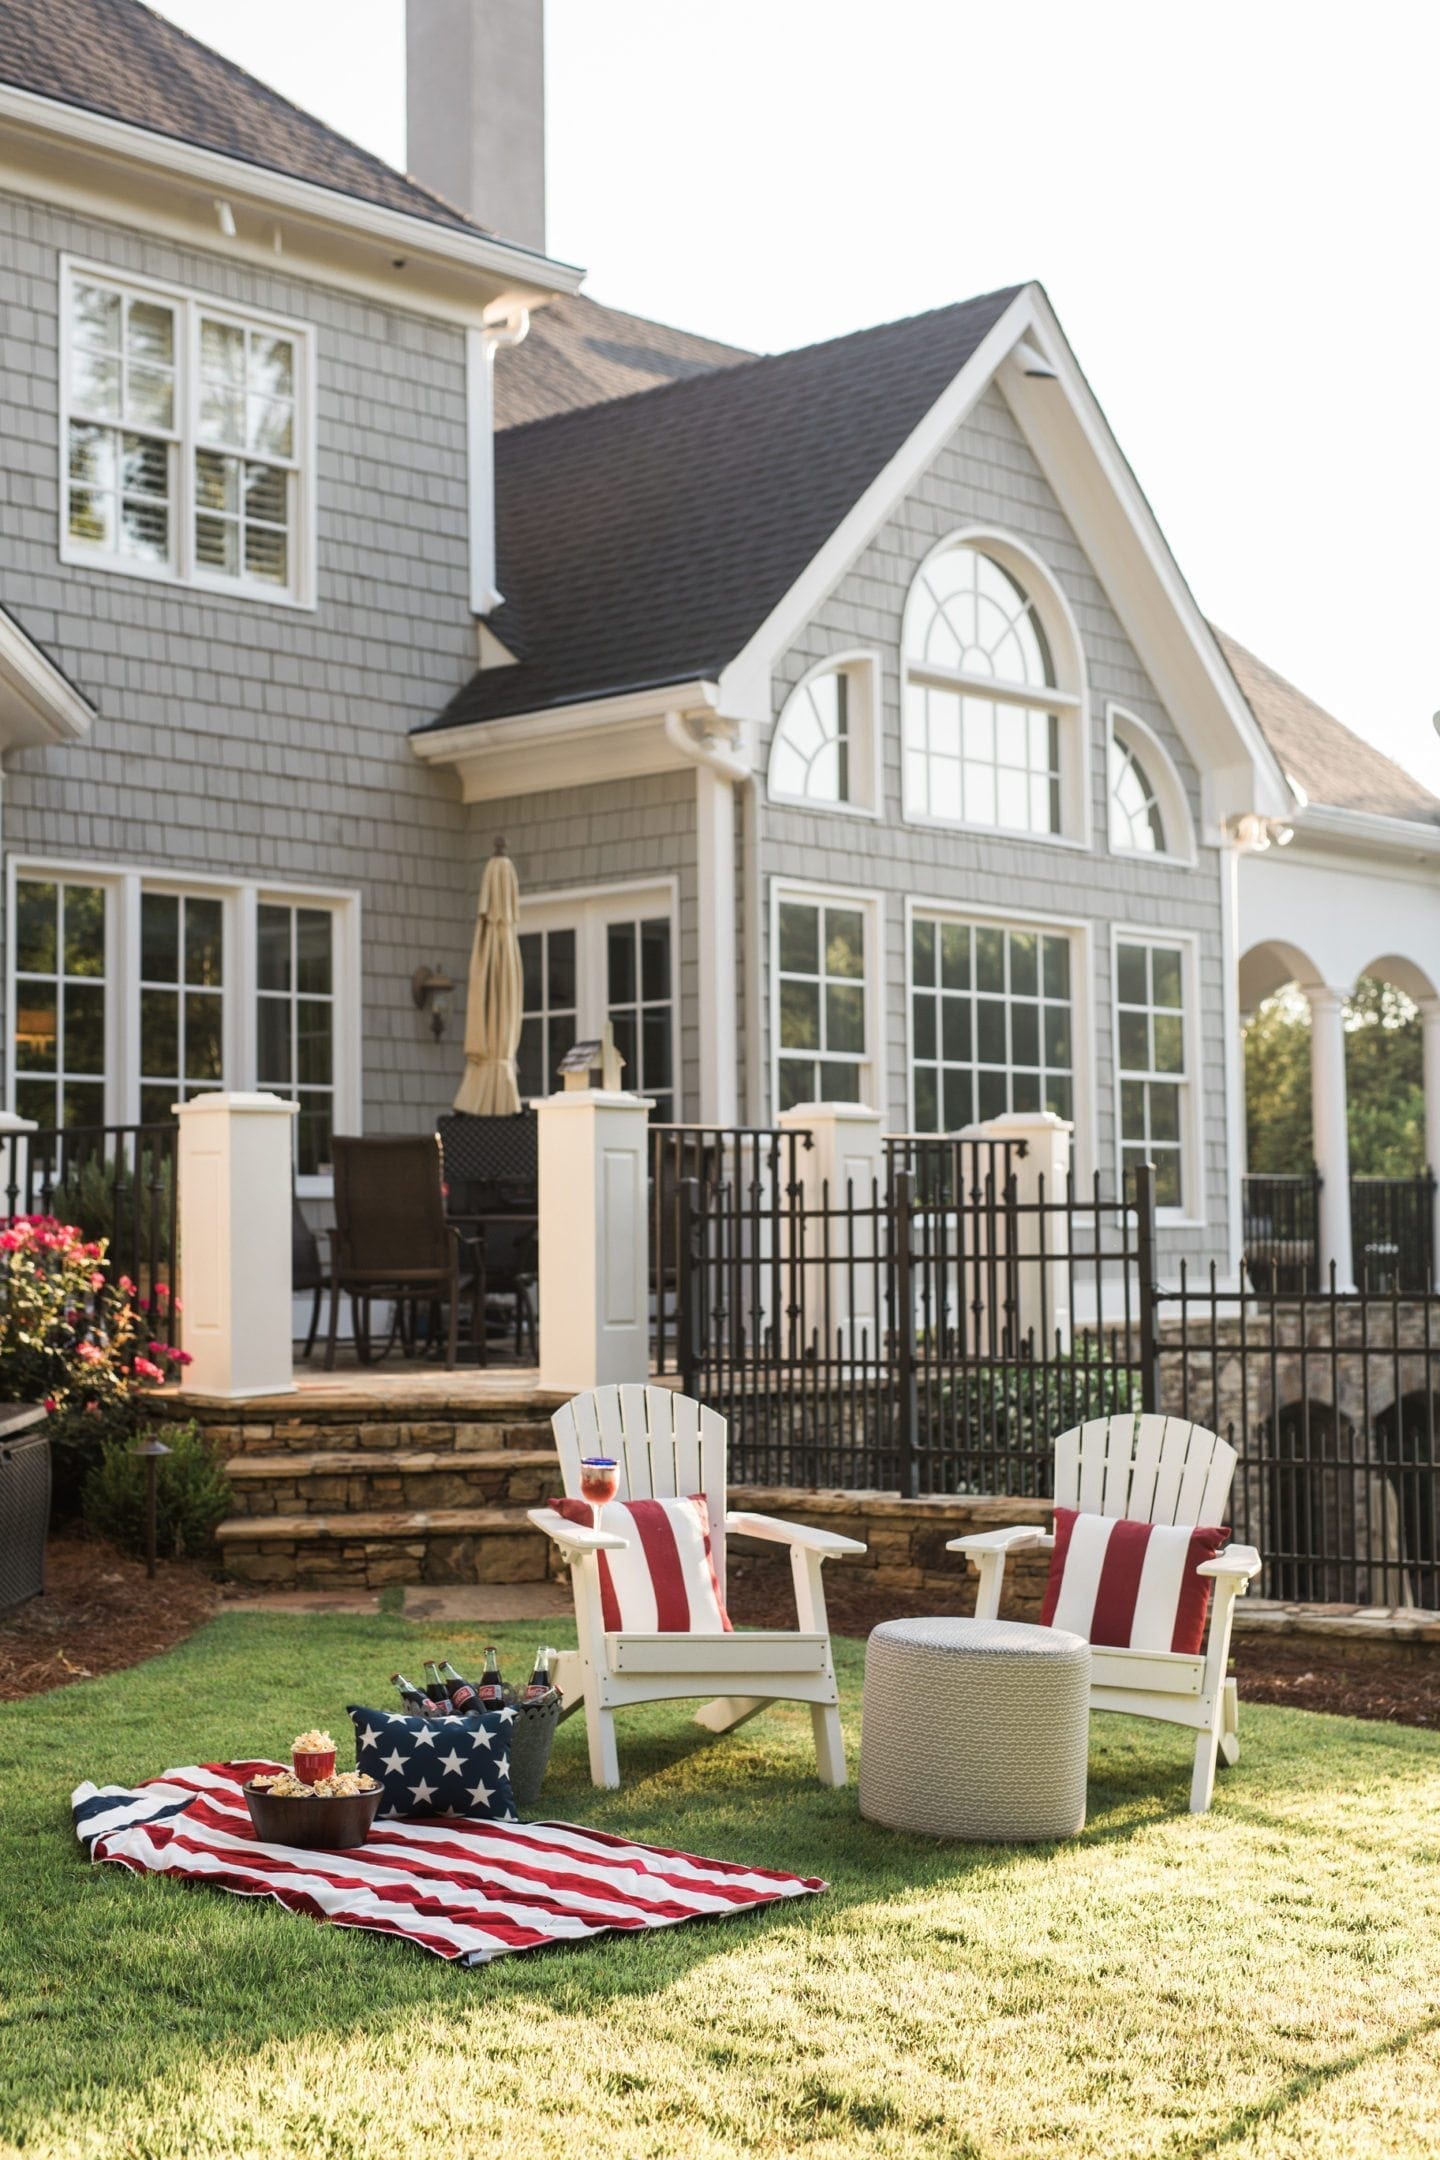 White wood adirondack chairs with red and white strip outdoor pillows set the stage for a Fourth of July backyard party. Gray shingle house Cape Cod style house with Americana felt an outdoor porch setting.